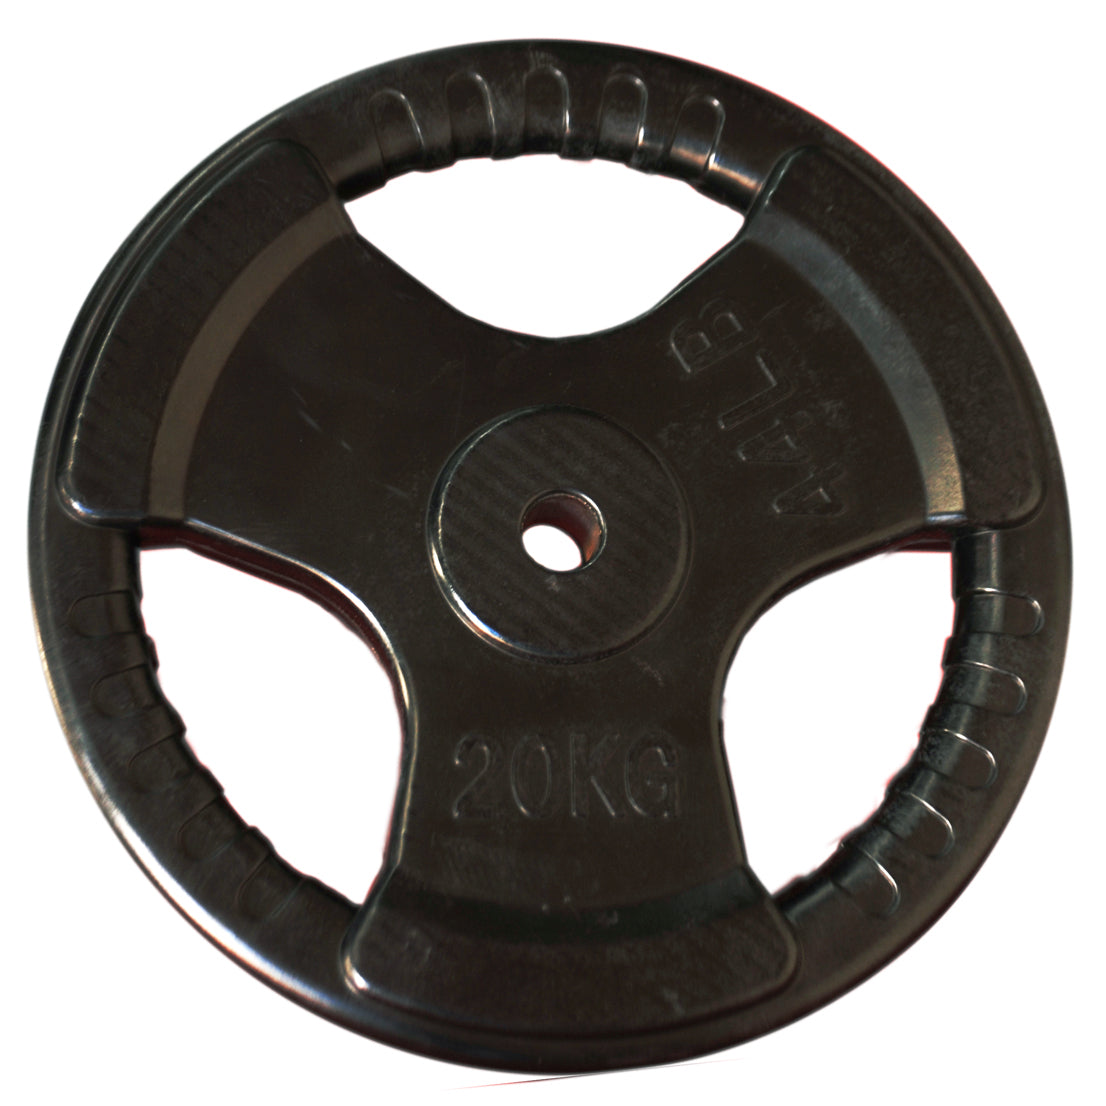 20kg Standard Size Rubber Coated Weight Plate